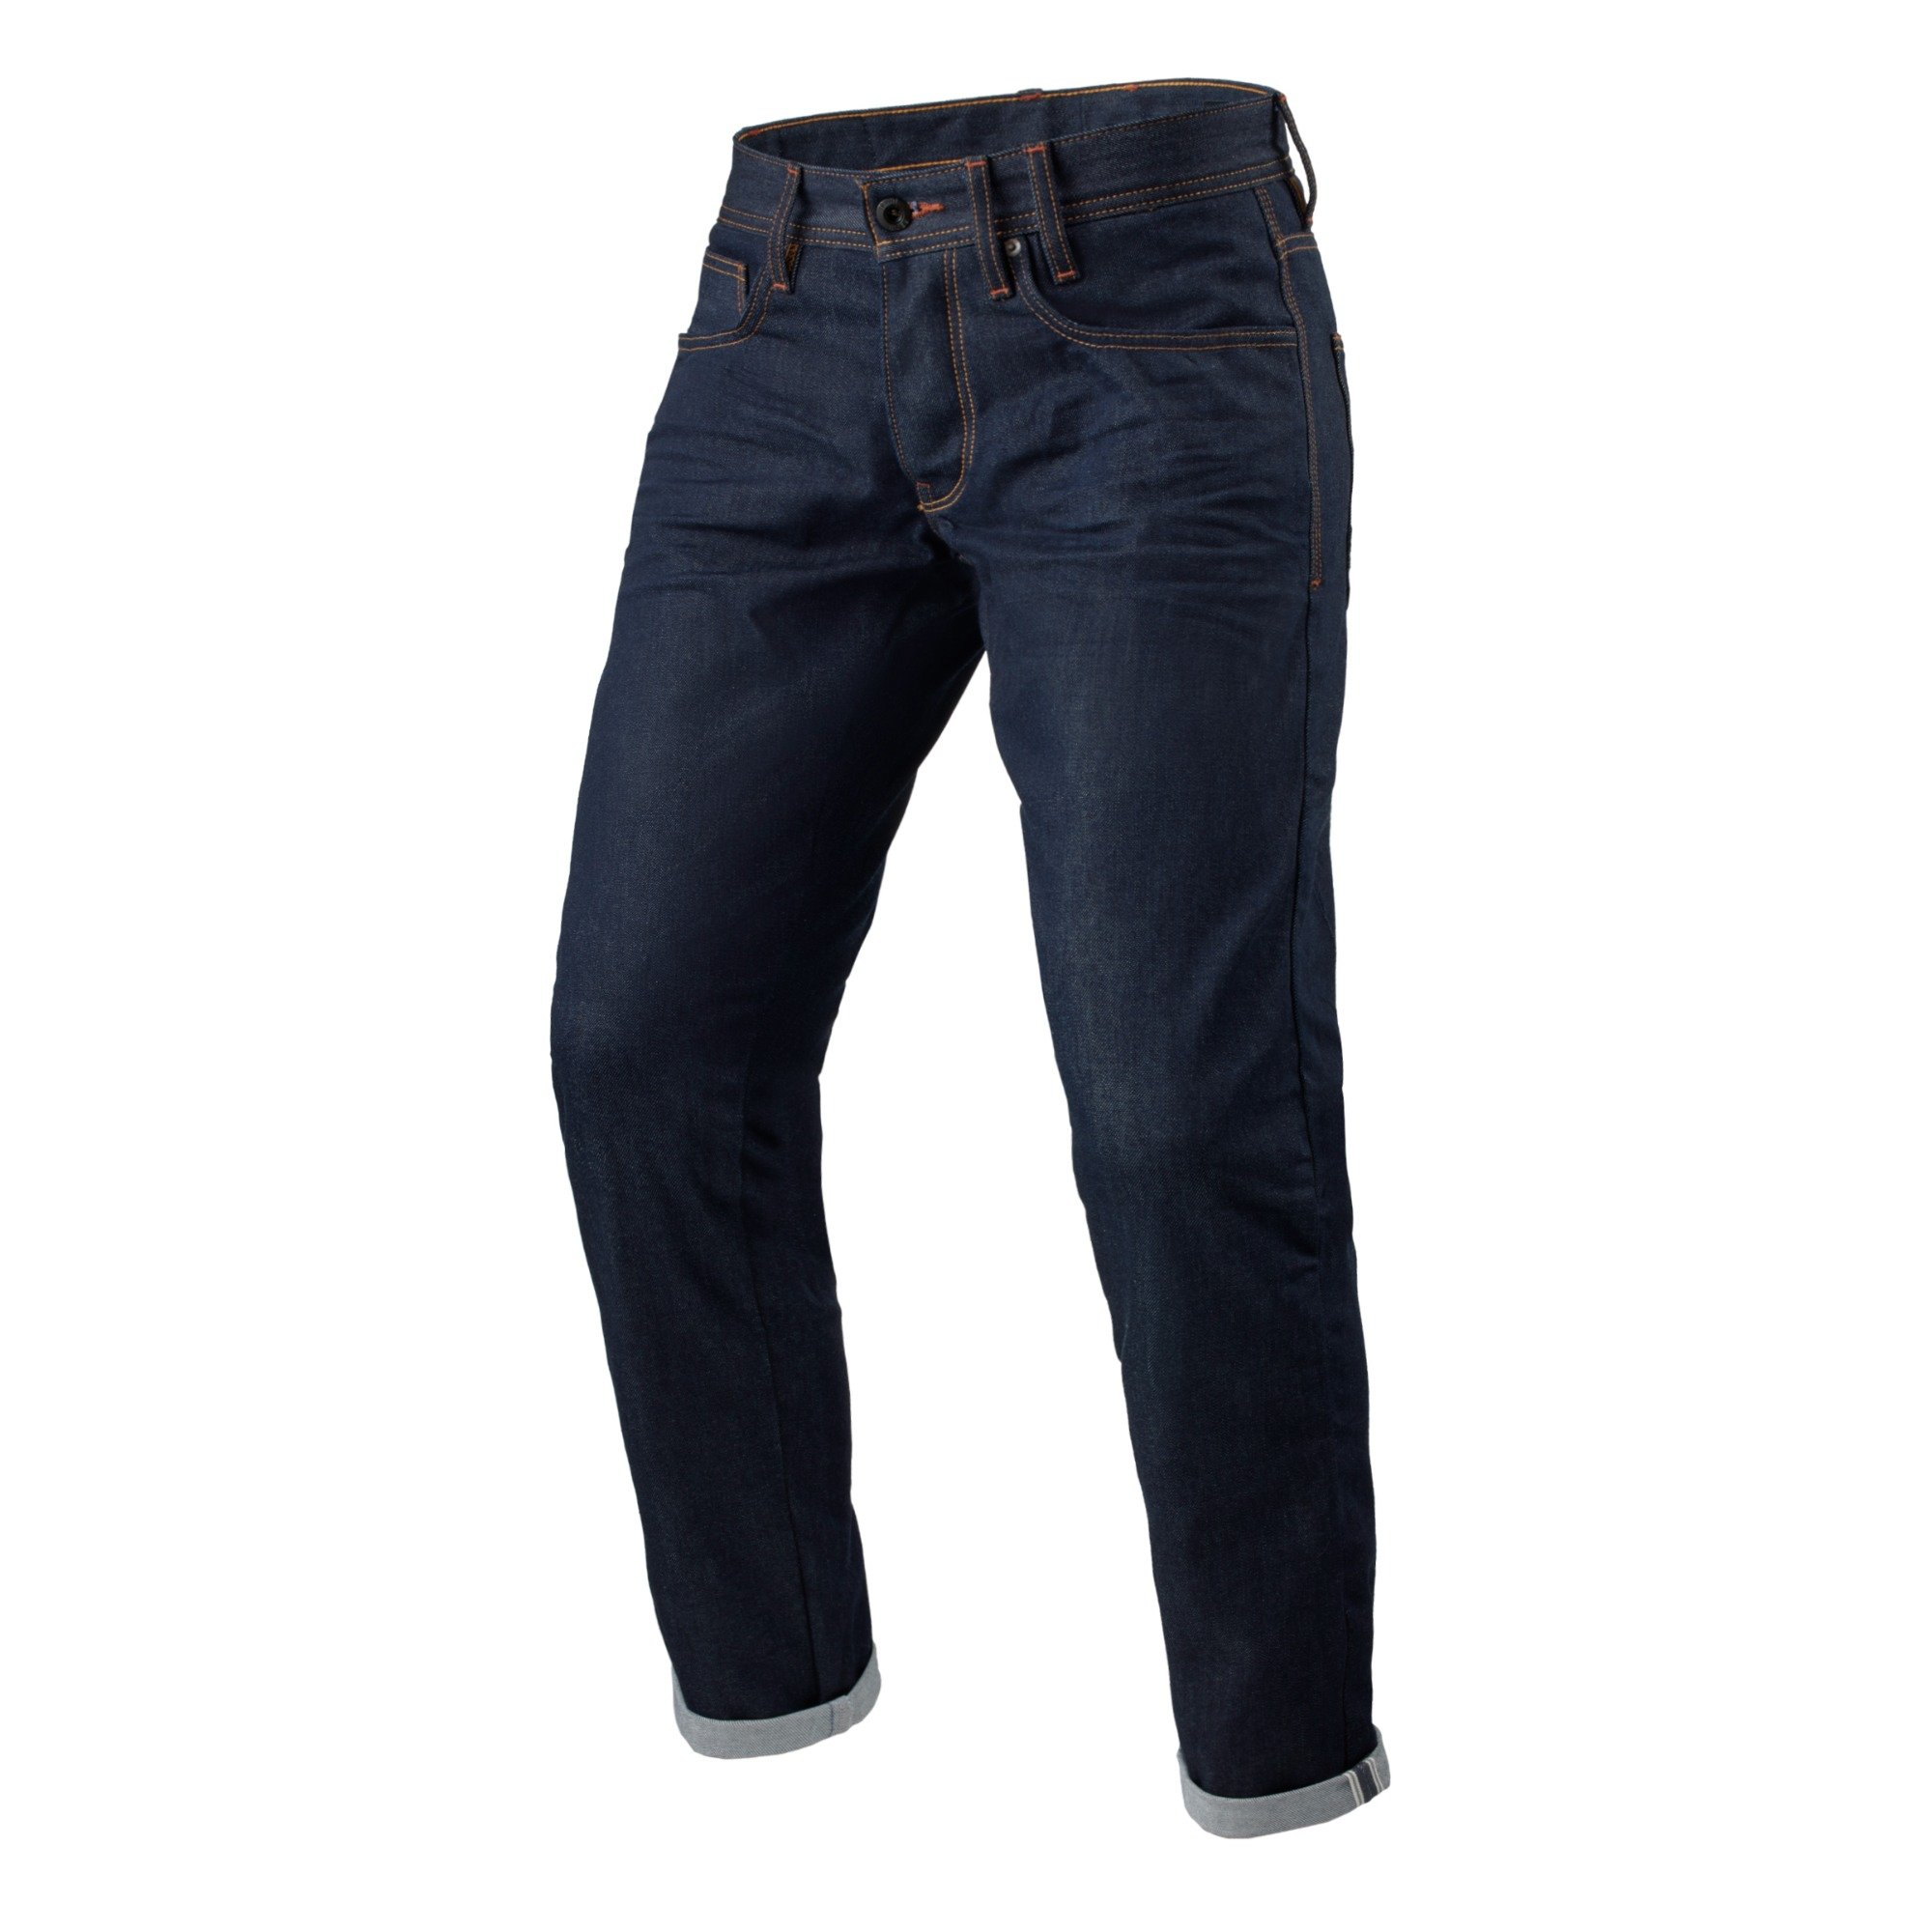 Image of REV'IT! Jeans Lewis Selvedge TF Dark Blue L32 Motorcycle Pants Size L32/W31 ID 8700001358040